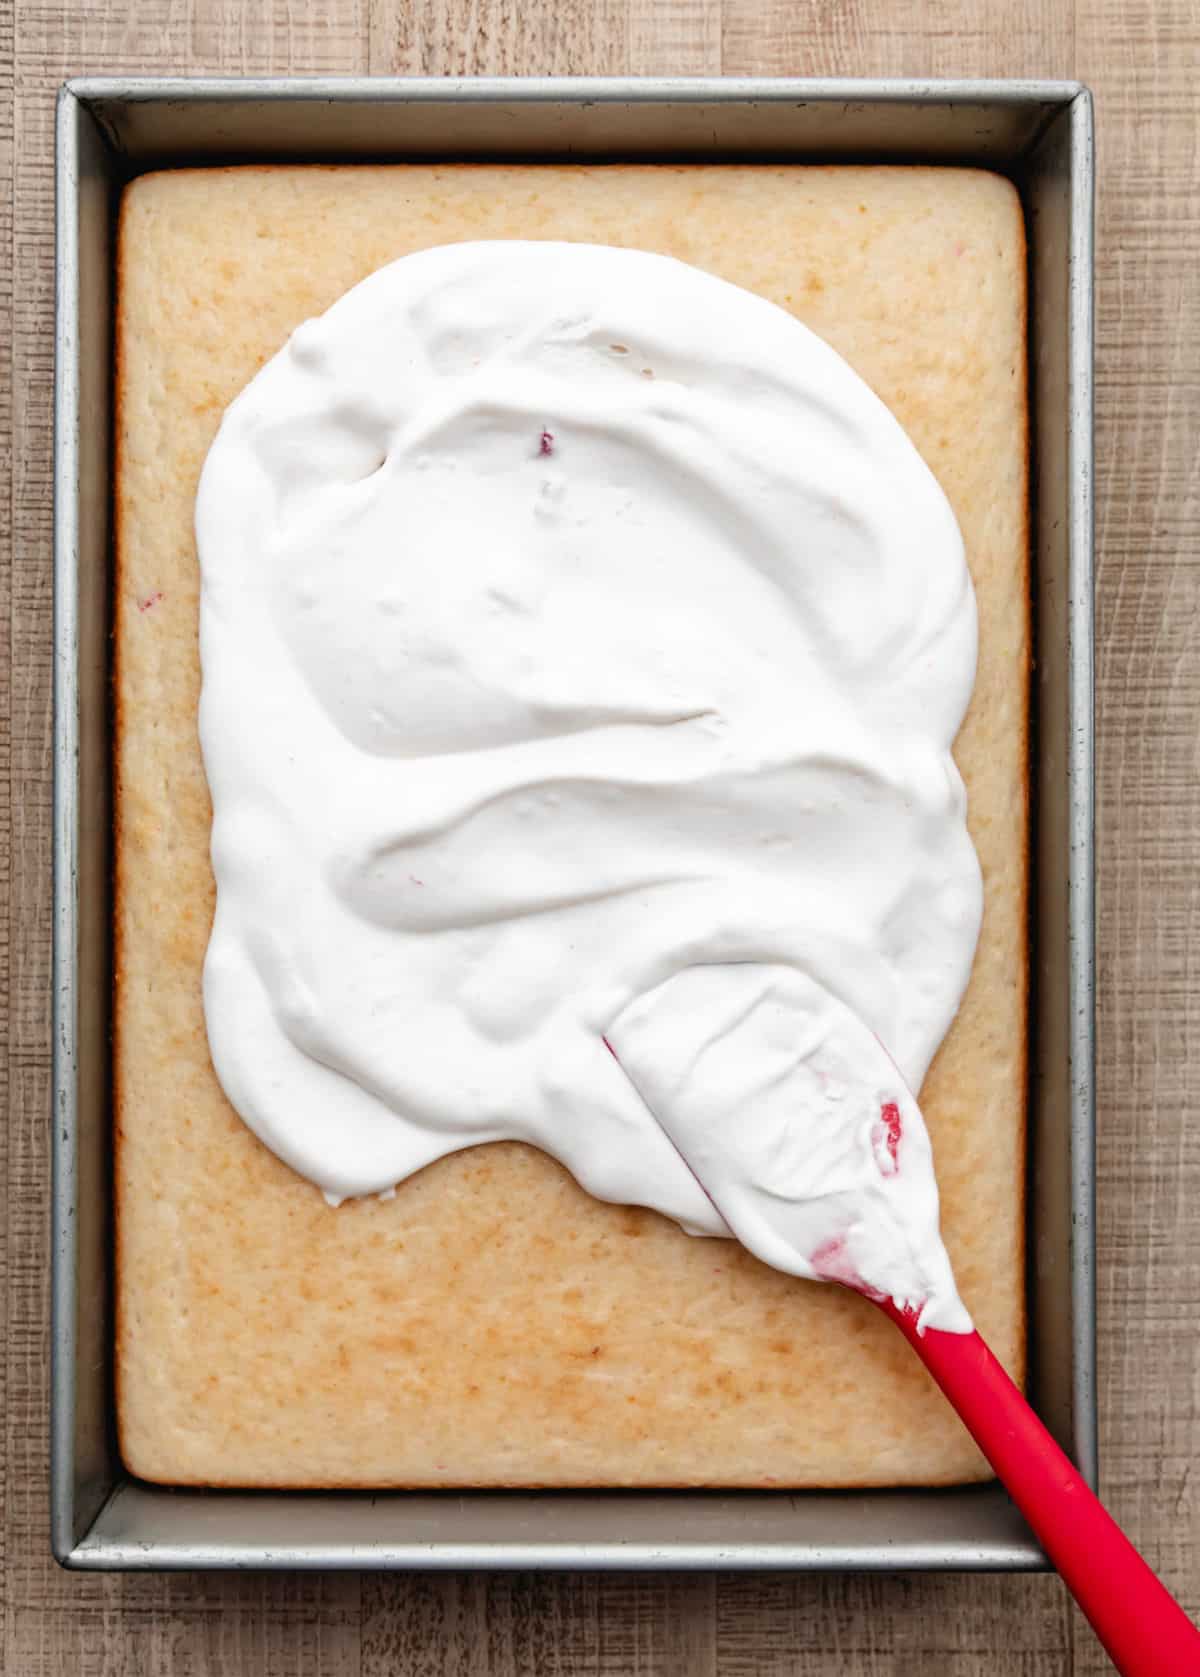 A red rubber spatula spreading frosting over a bake strawberry yogurt cake.